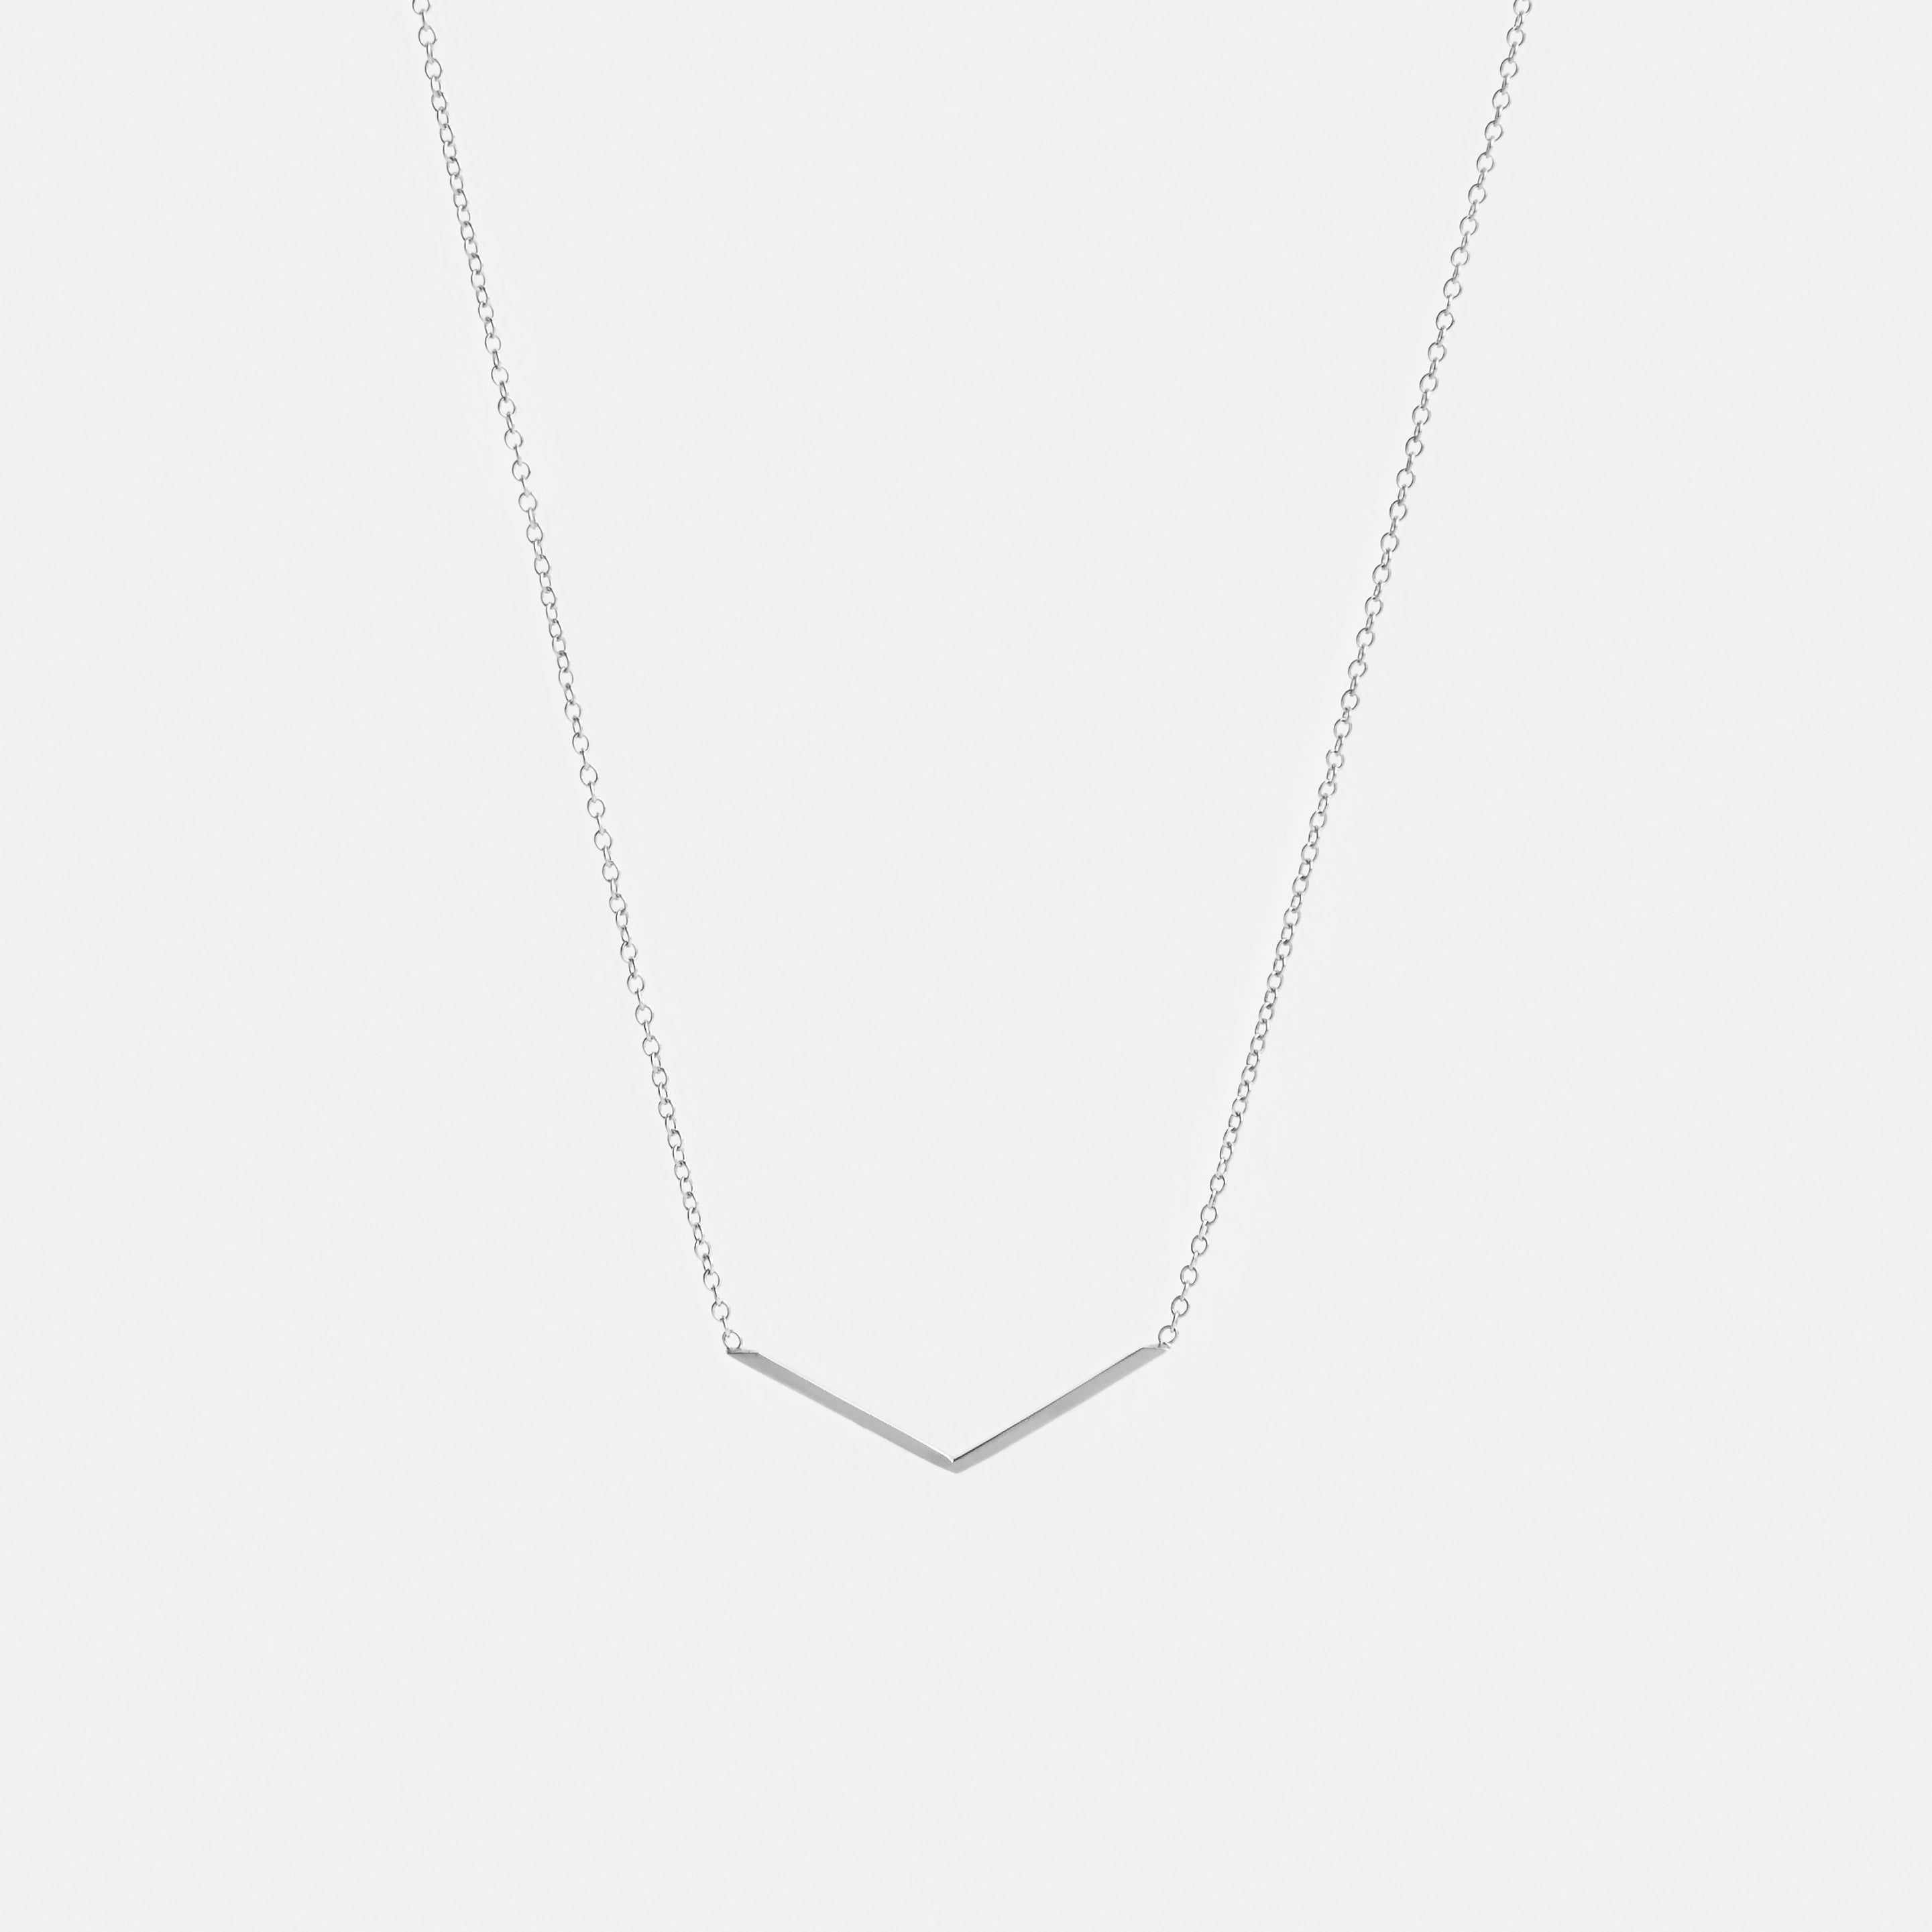 Avi Plain Necklace in 14k White Gold By SHW Fine Jewelry NYC